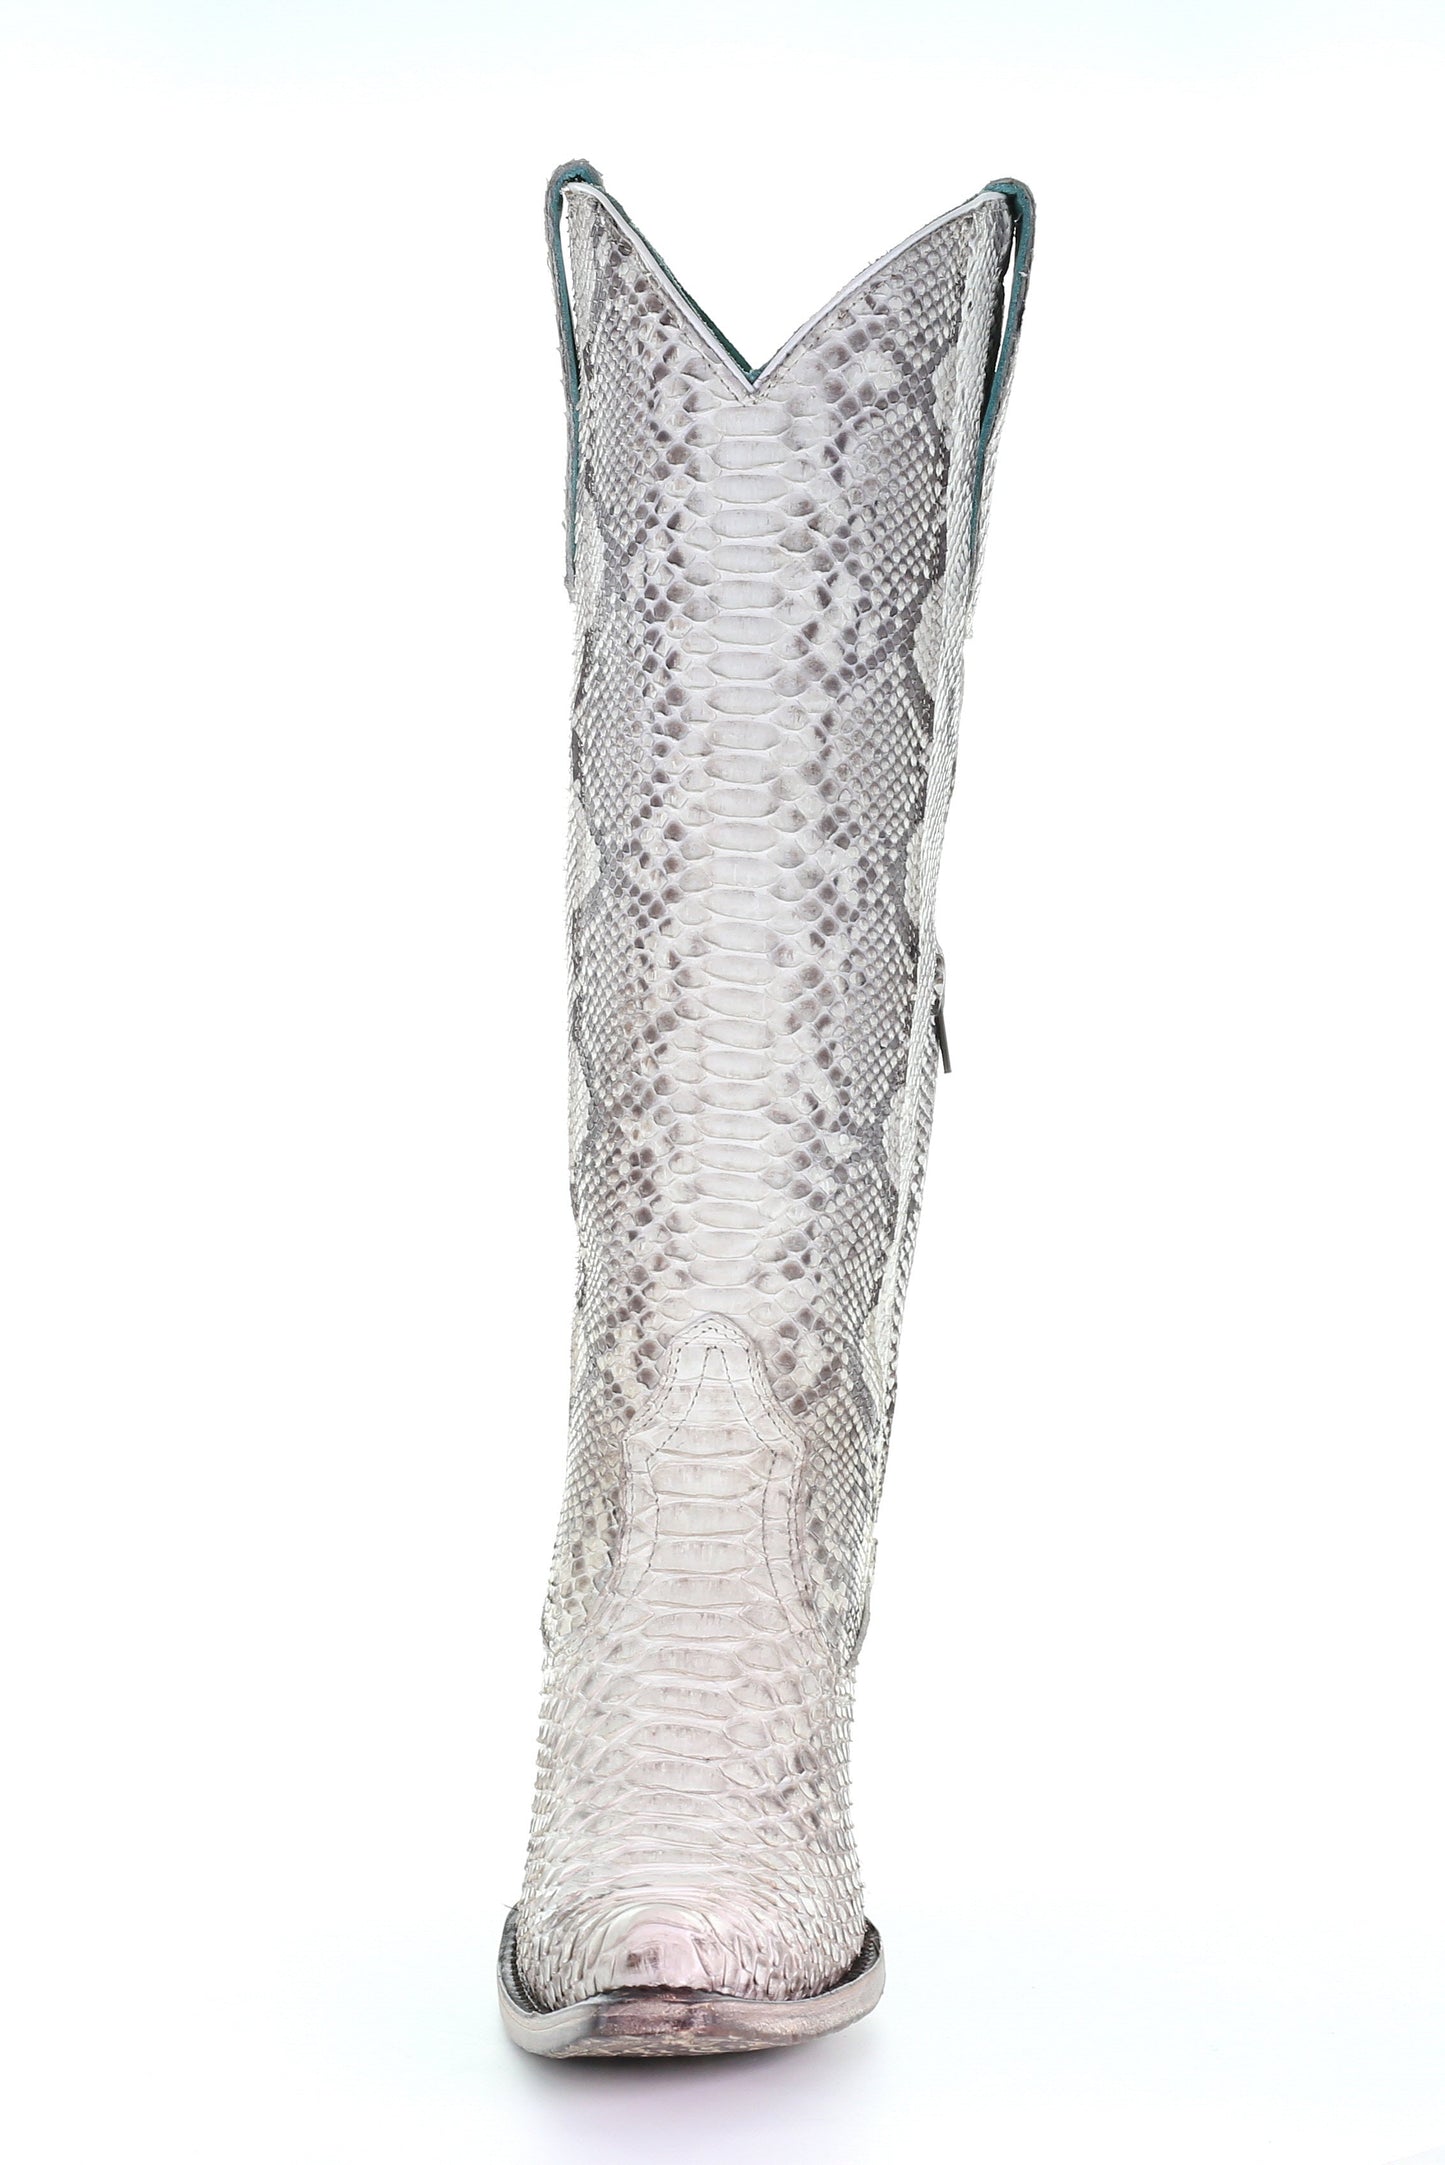 A3789 - Corral white western cowgirl python knee high boots for women-Kuet.us